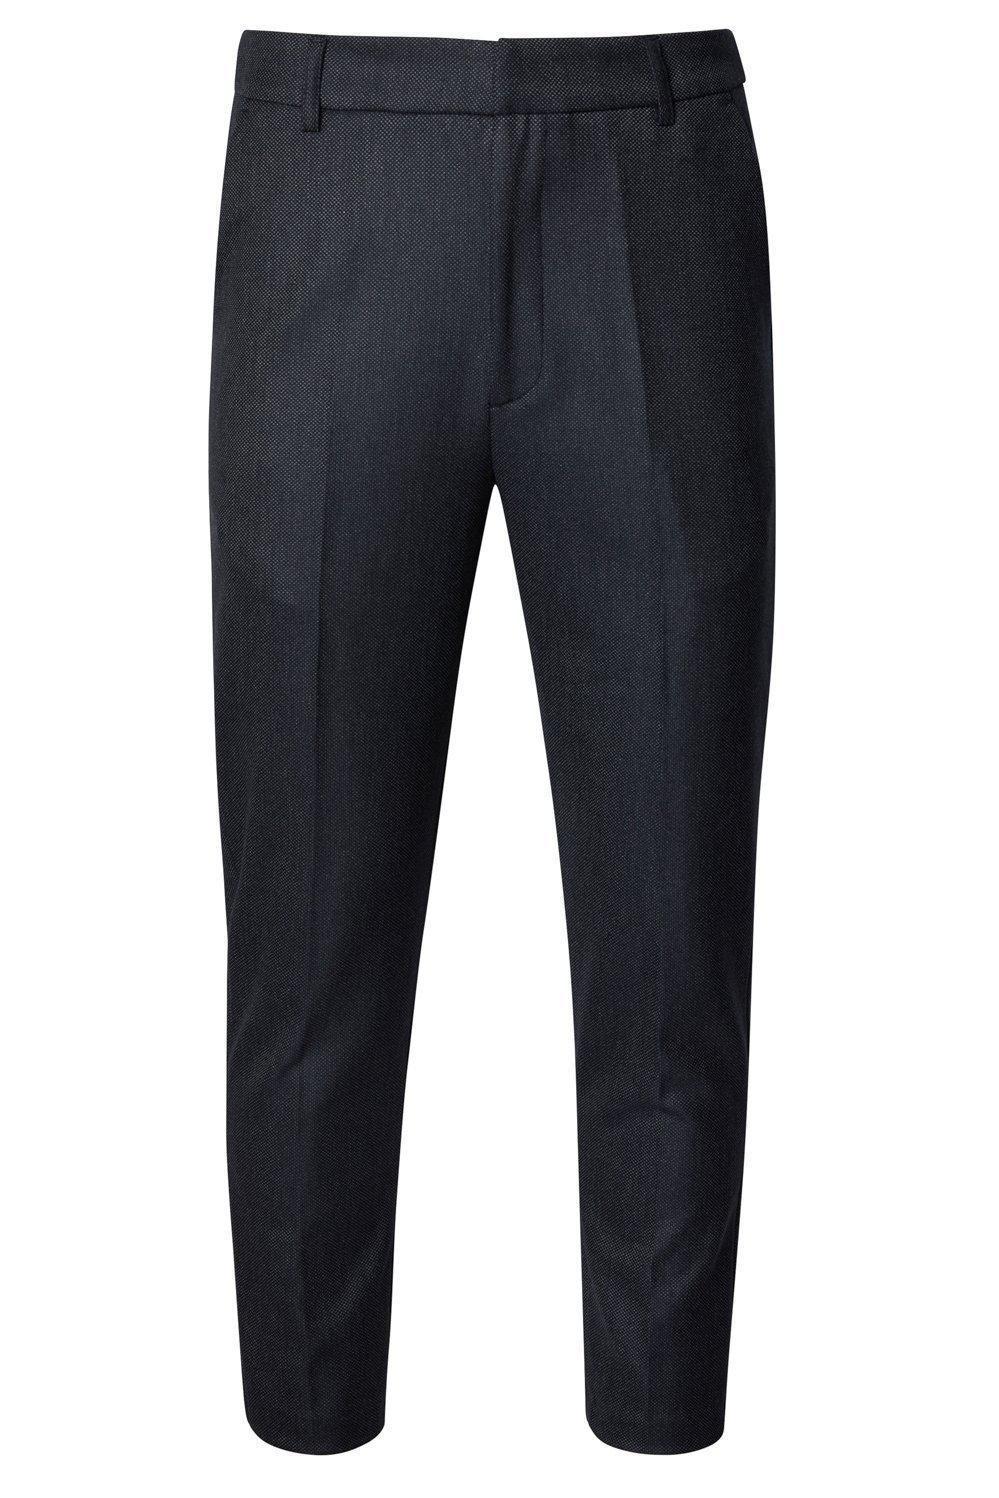 Un-cuffed Chain Fitted Pants  - Navy - Ron Tomson